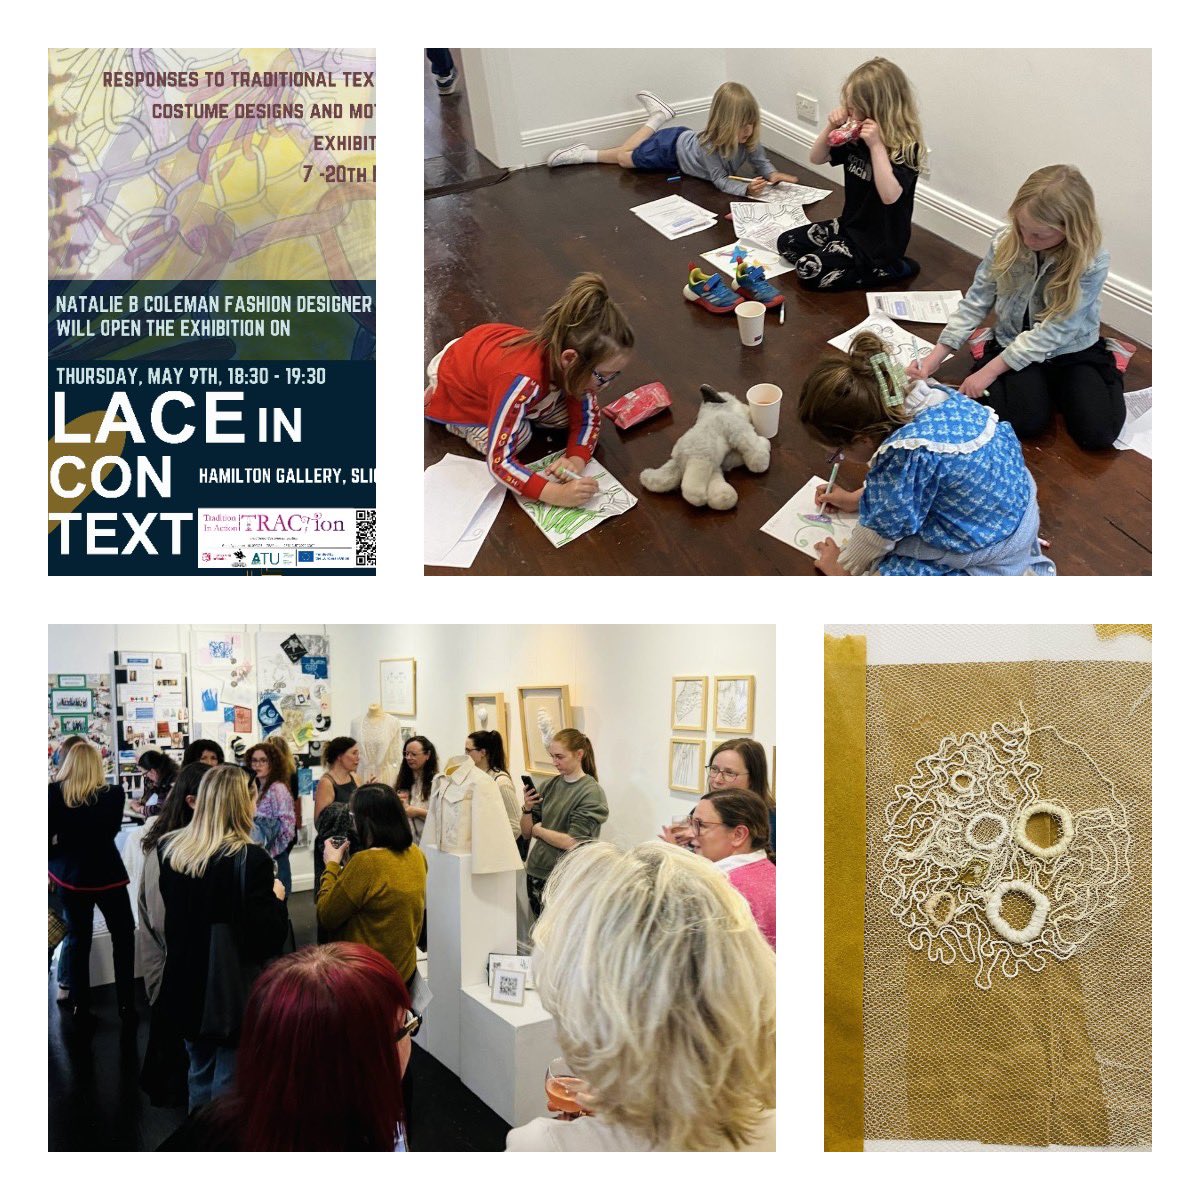 Adult learners showcased their innovative responses to traditional costume designs and motifs at the TRACtion exhibition launch on 9 May. The exhibition (7-20 May) organiser was @KathrynMcS @ATUStAngelas. Official launch by designer @nataliebcoleman #textileart #designprocess